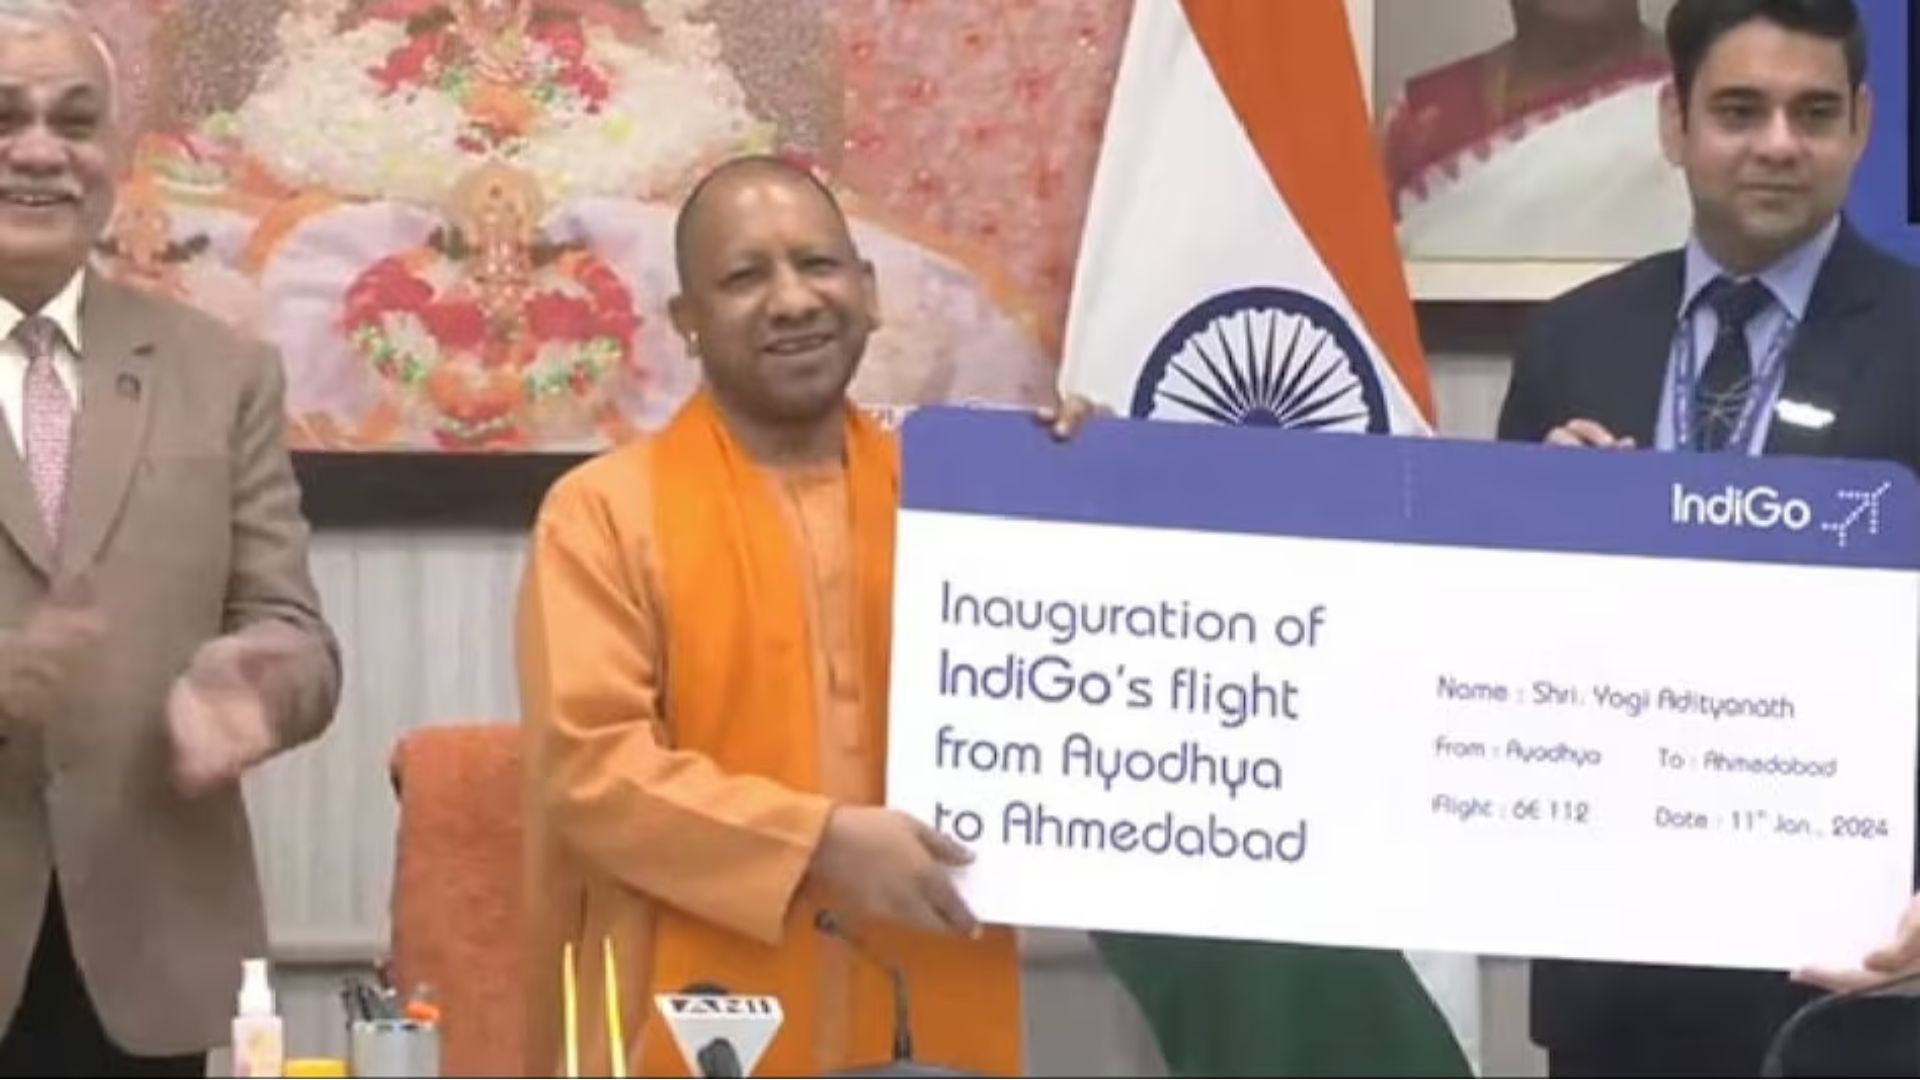 100 chartered planes to land in Ayodhya on January 22: CM Yogi